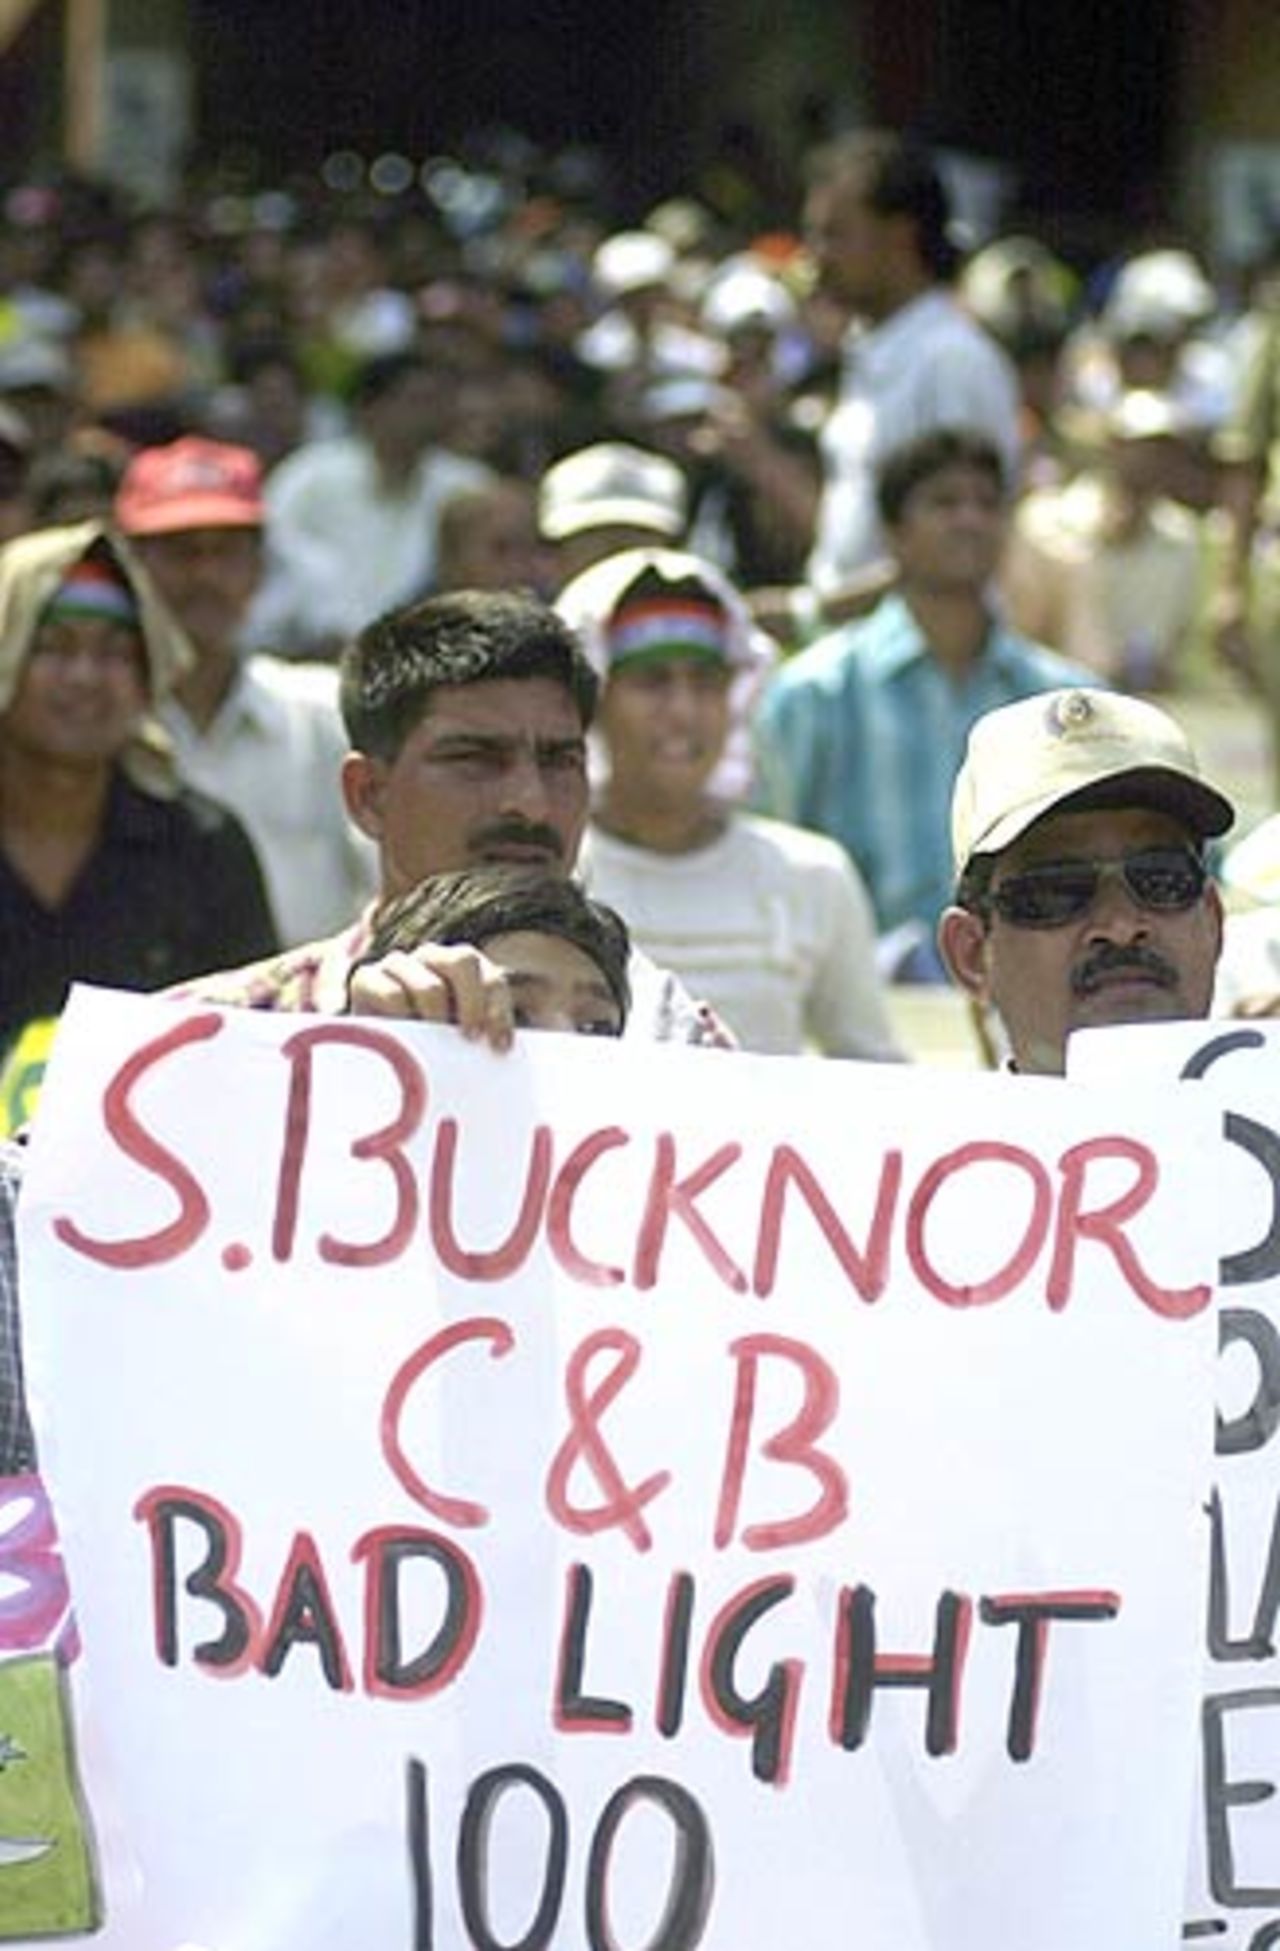 Steve Bucknor faced the fans' ire for his decision to dismiss Sachin Tendulkar the previous day, India v Pakistan, 2nd Test, Kolkata, March 18, 2005